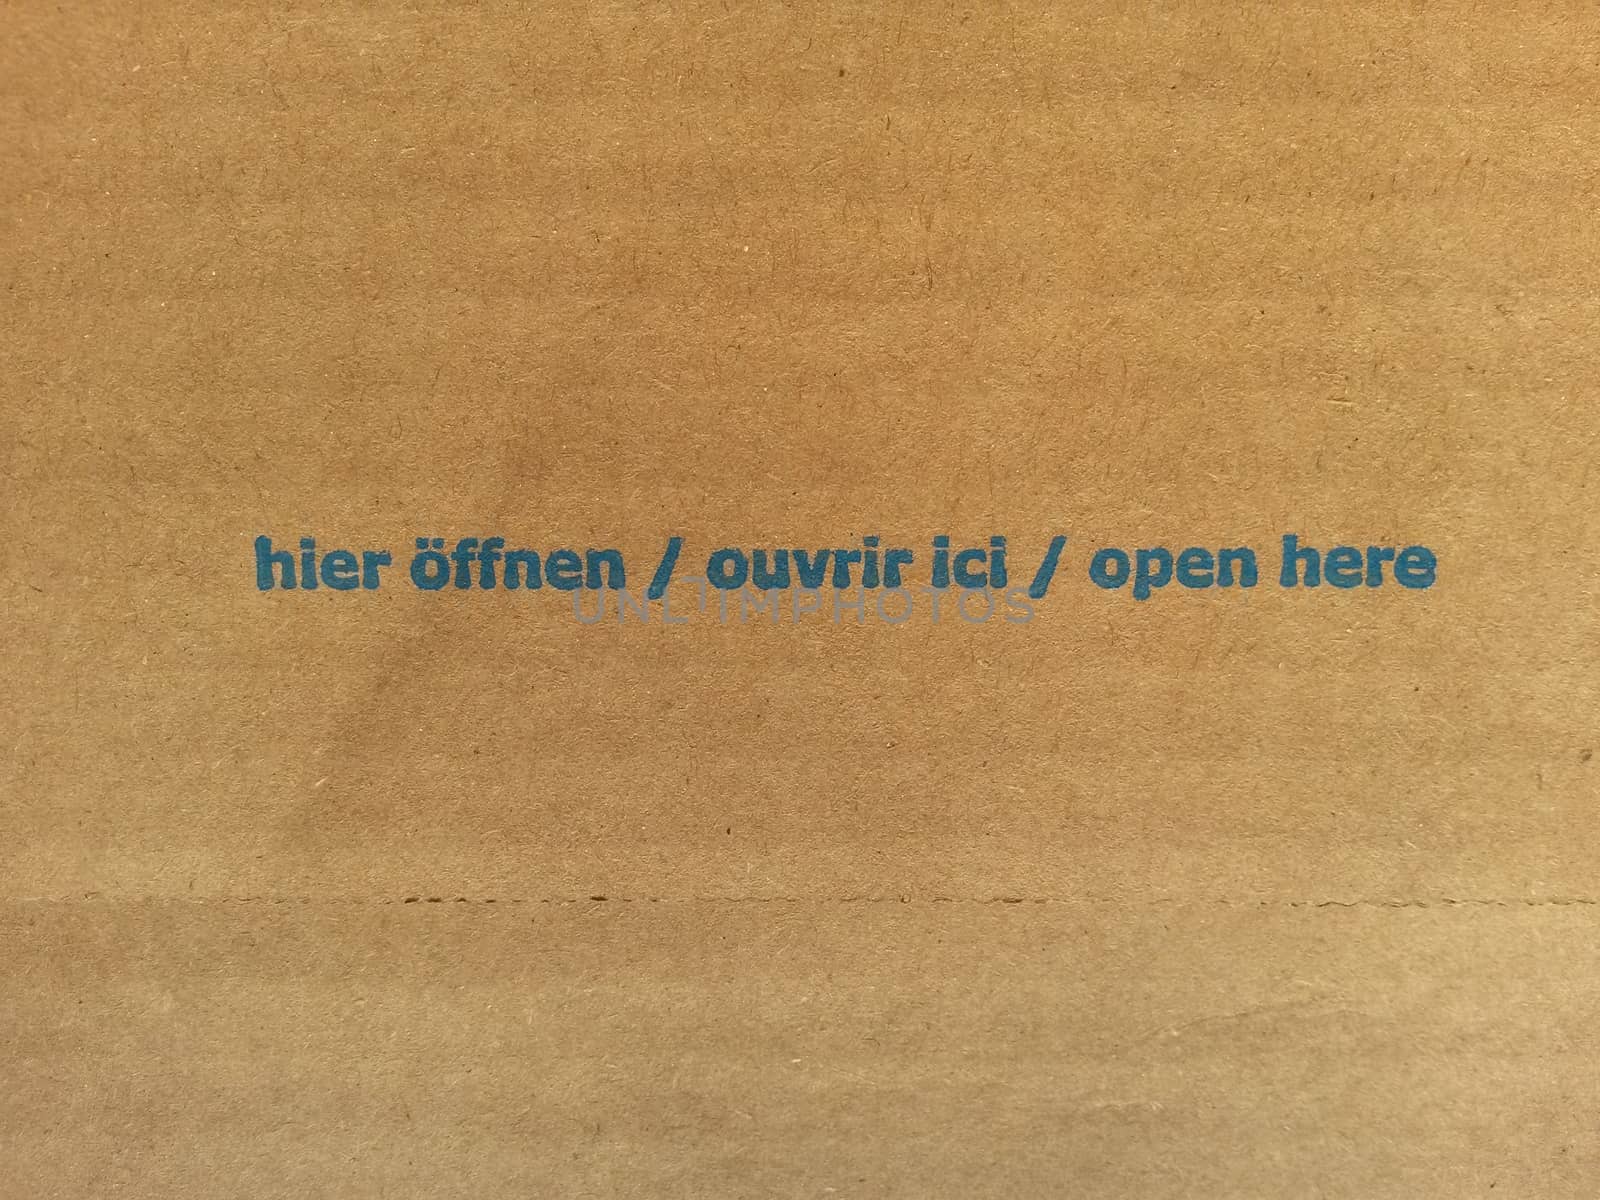 Hier offnen - Ouvrir ici - Open here printed over corrugated cardboard